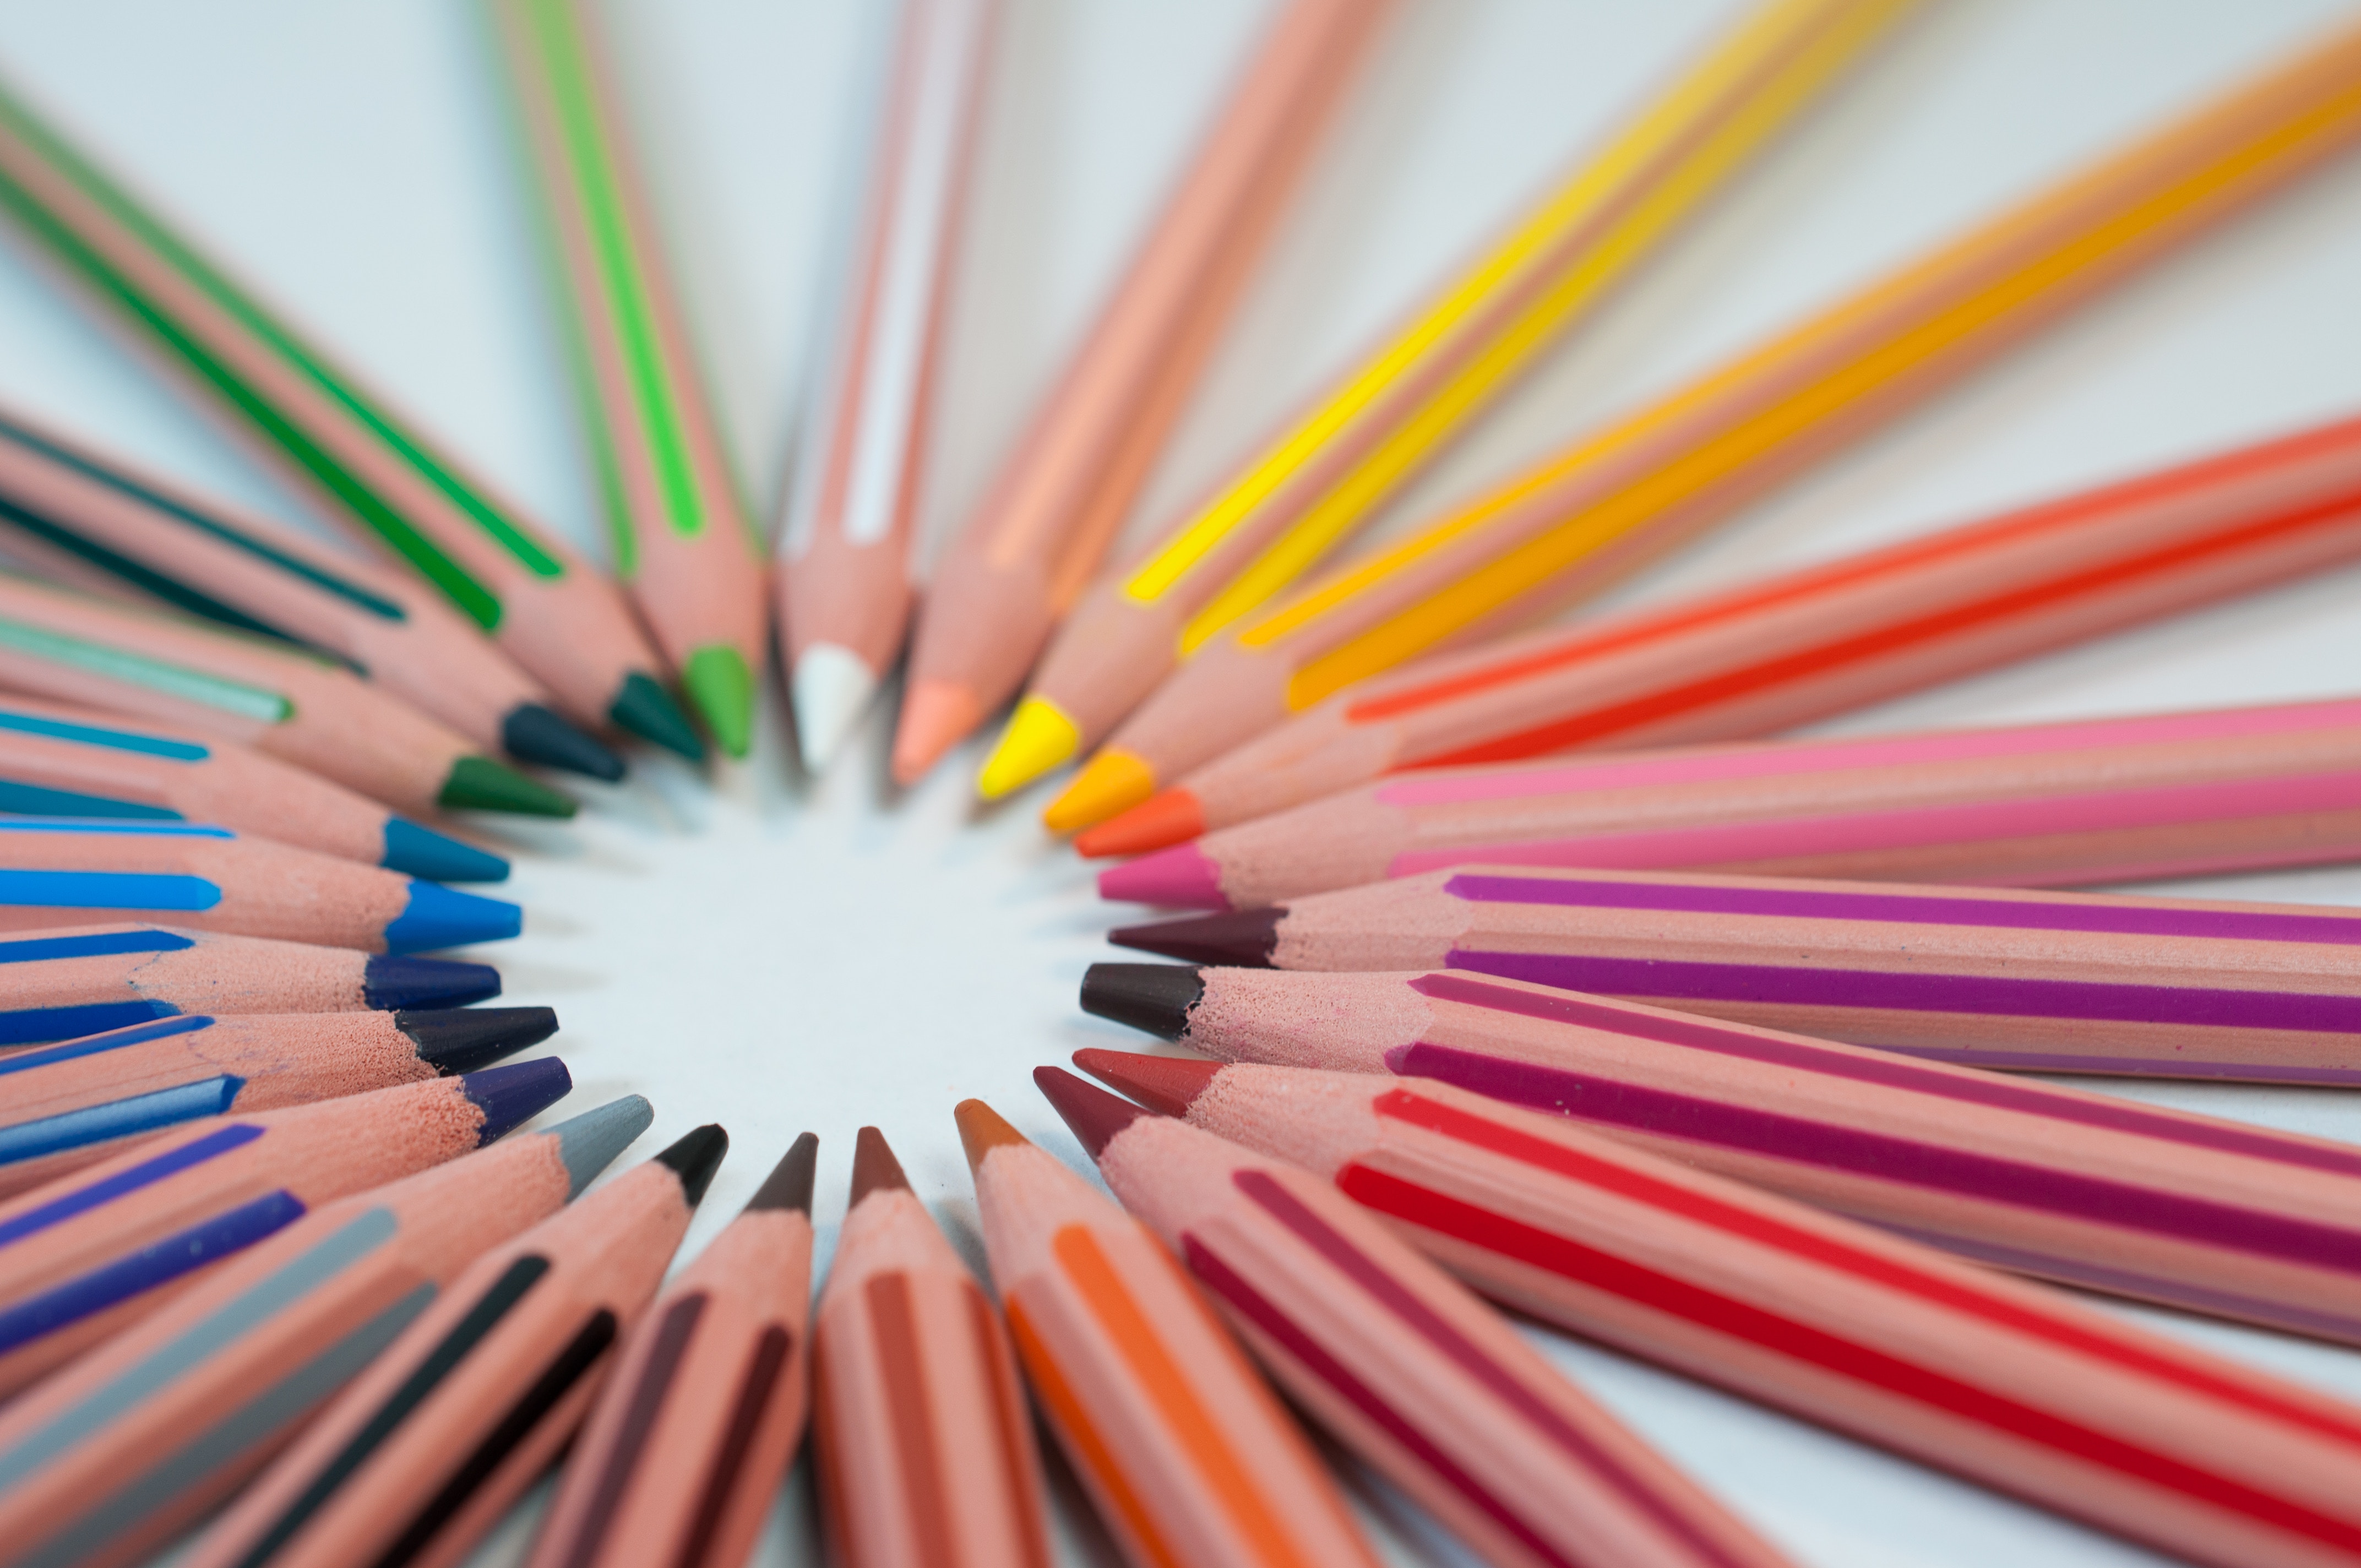 everyday creative practice - everyday creativity - set of colourful pencils in a circle